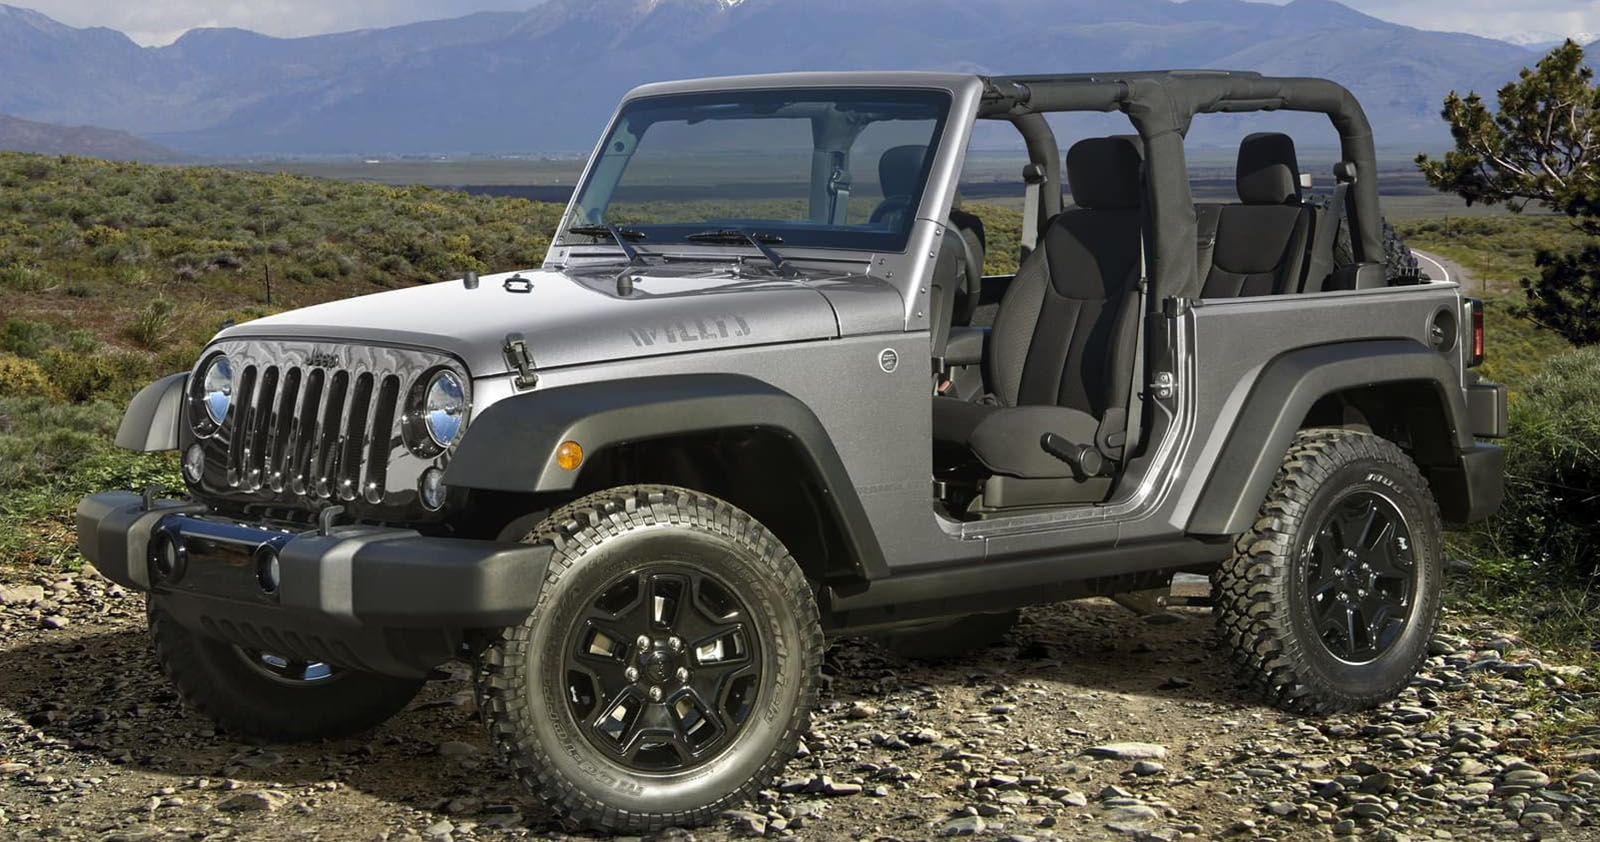 The Used-Jeep Buyers' Checklist 